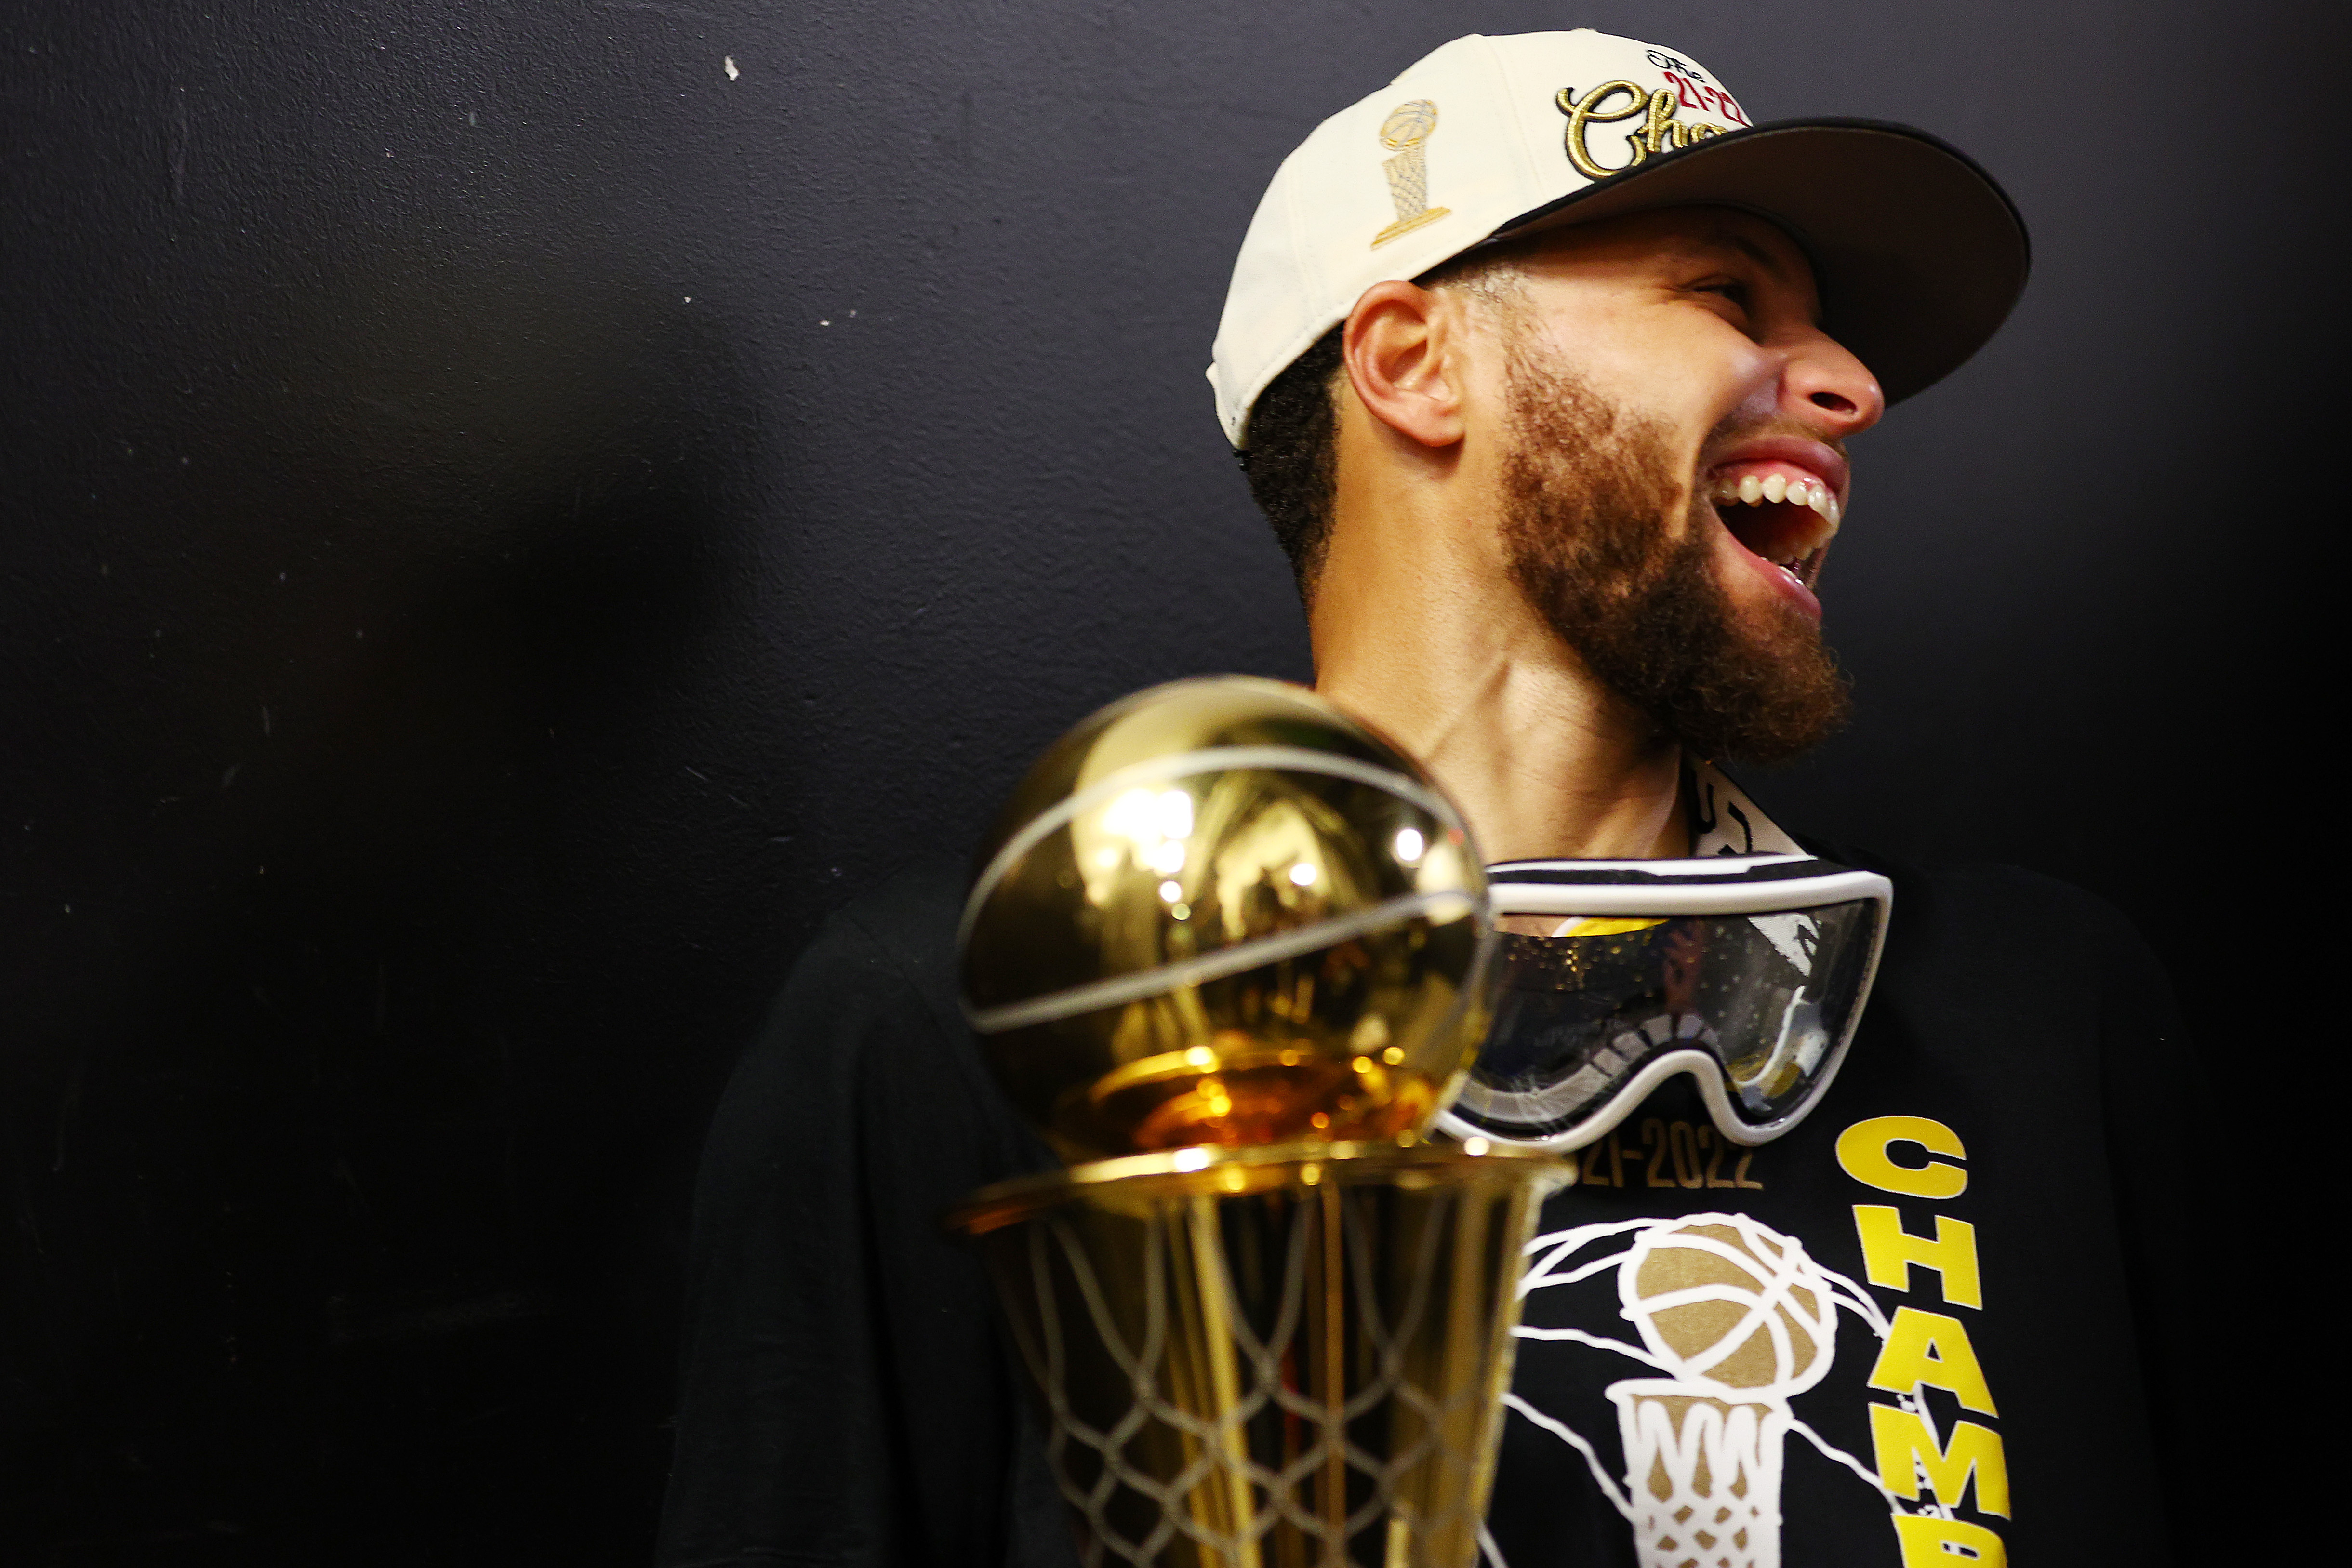 NBA Finals MVP Goes to Steph Curry – NBC Bay Area